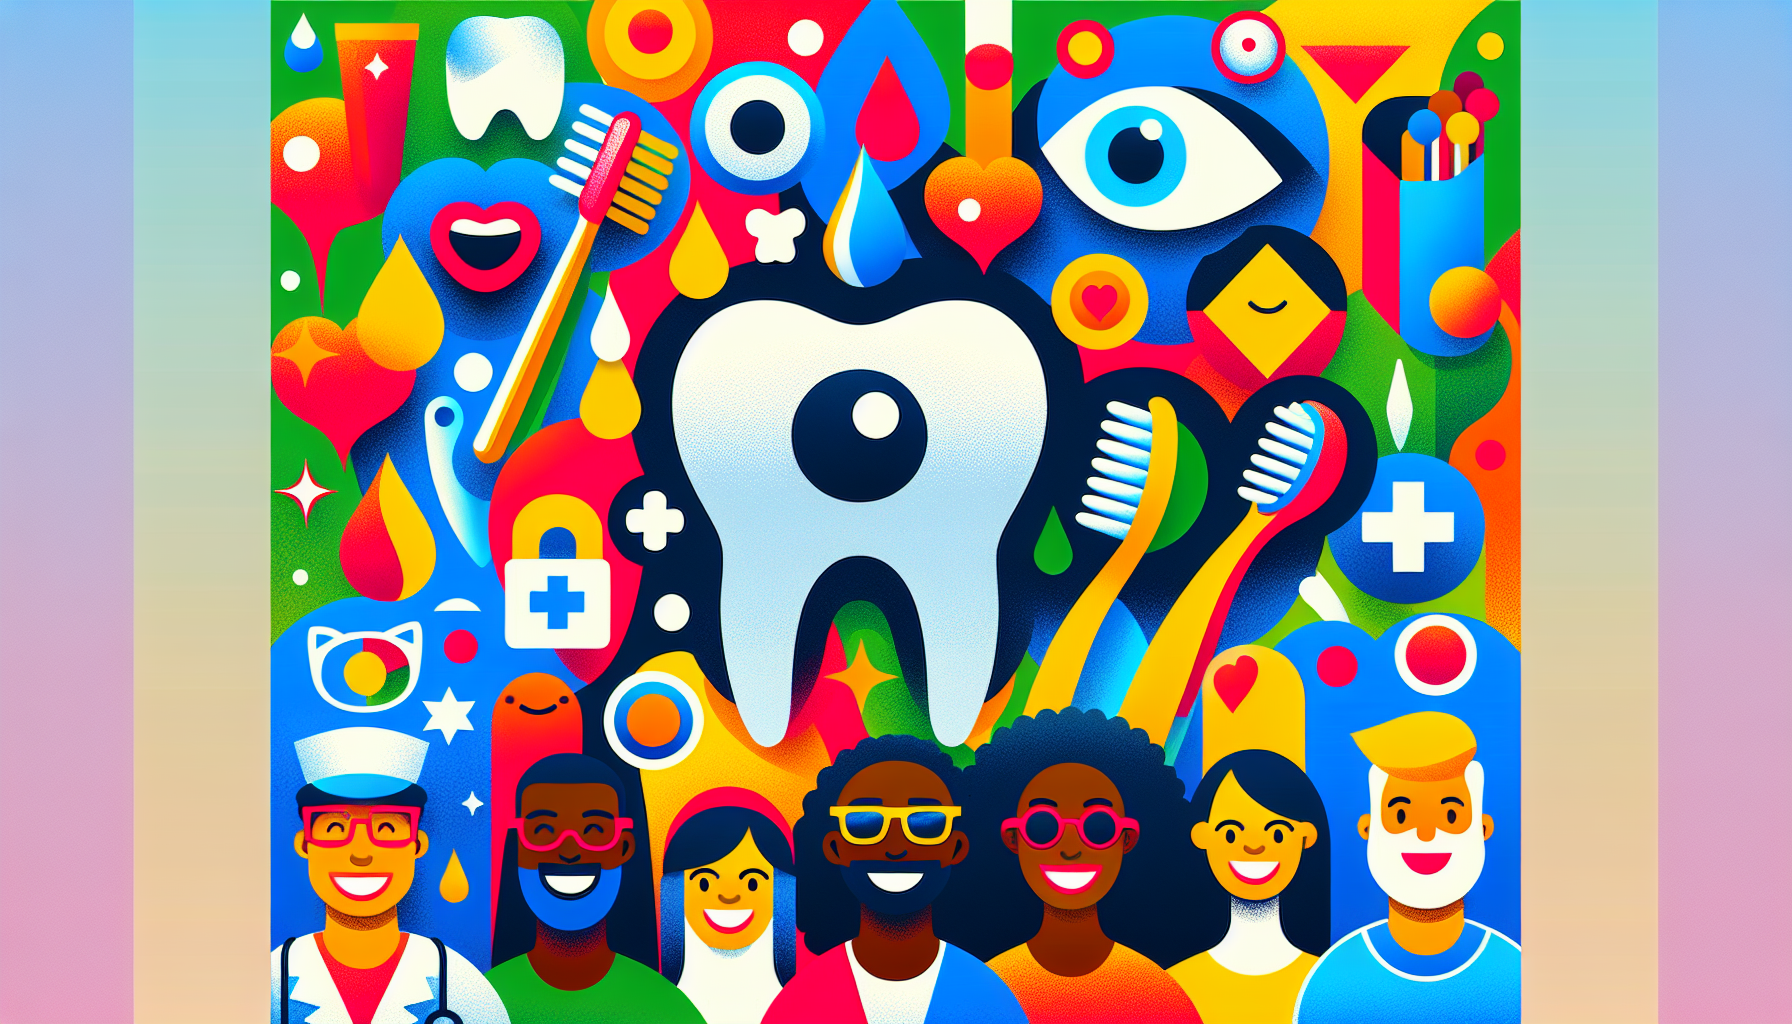 Dental and vision care icons